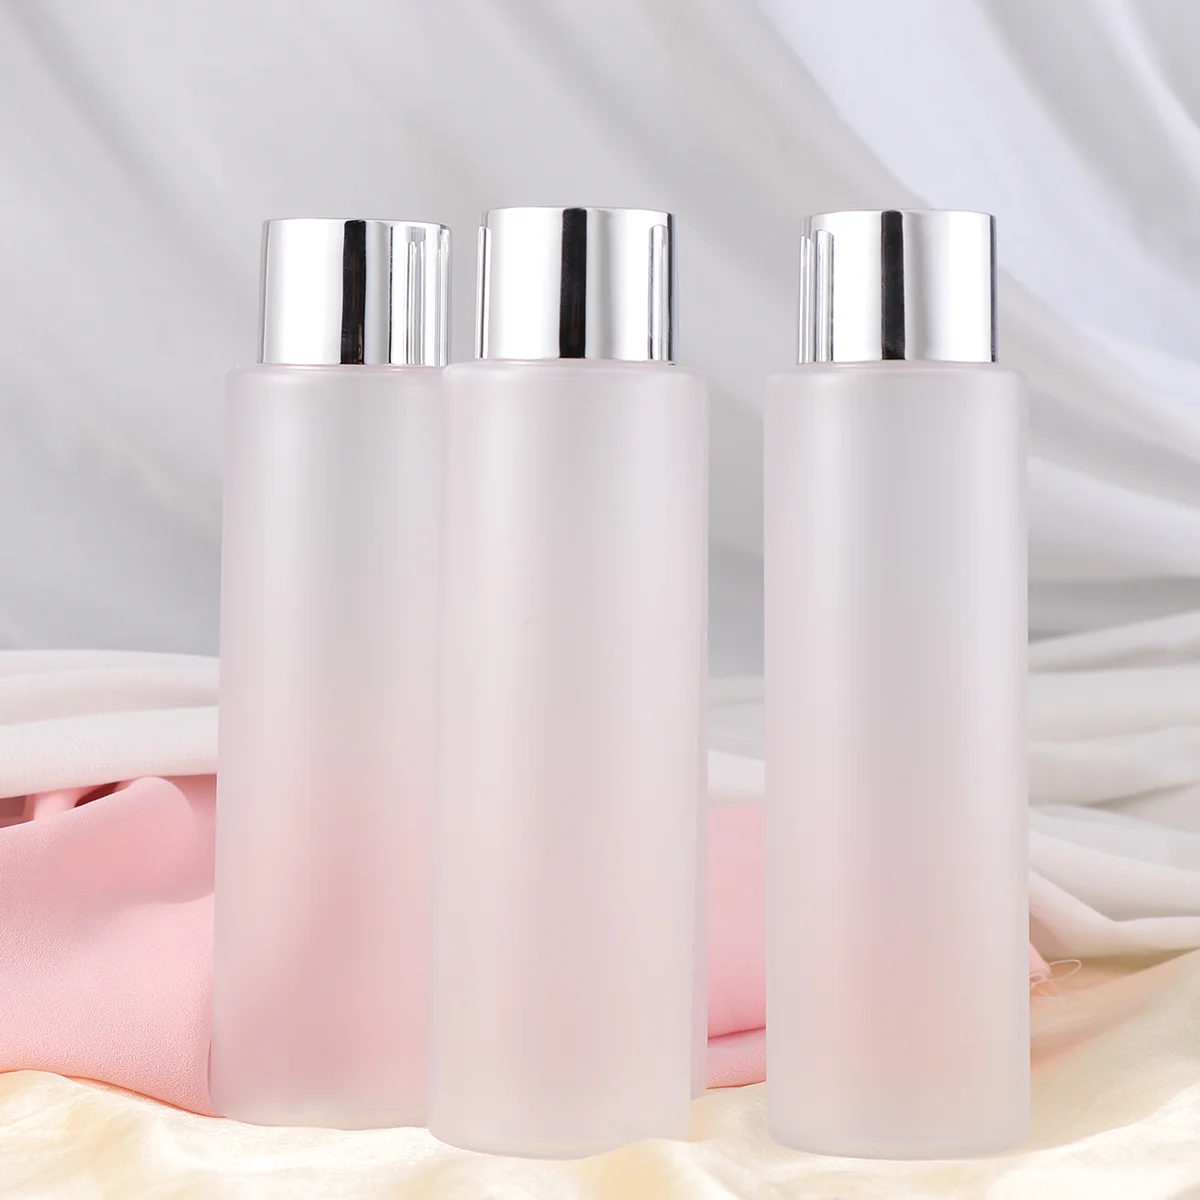 

4pcs Refillable Empty Bottle Vial Jar Pot Lotion Shower Shampoo Storage Container With Cap For Home Travel 200ml